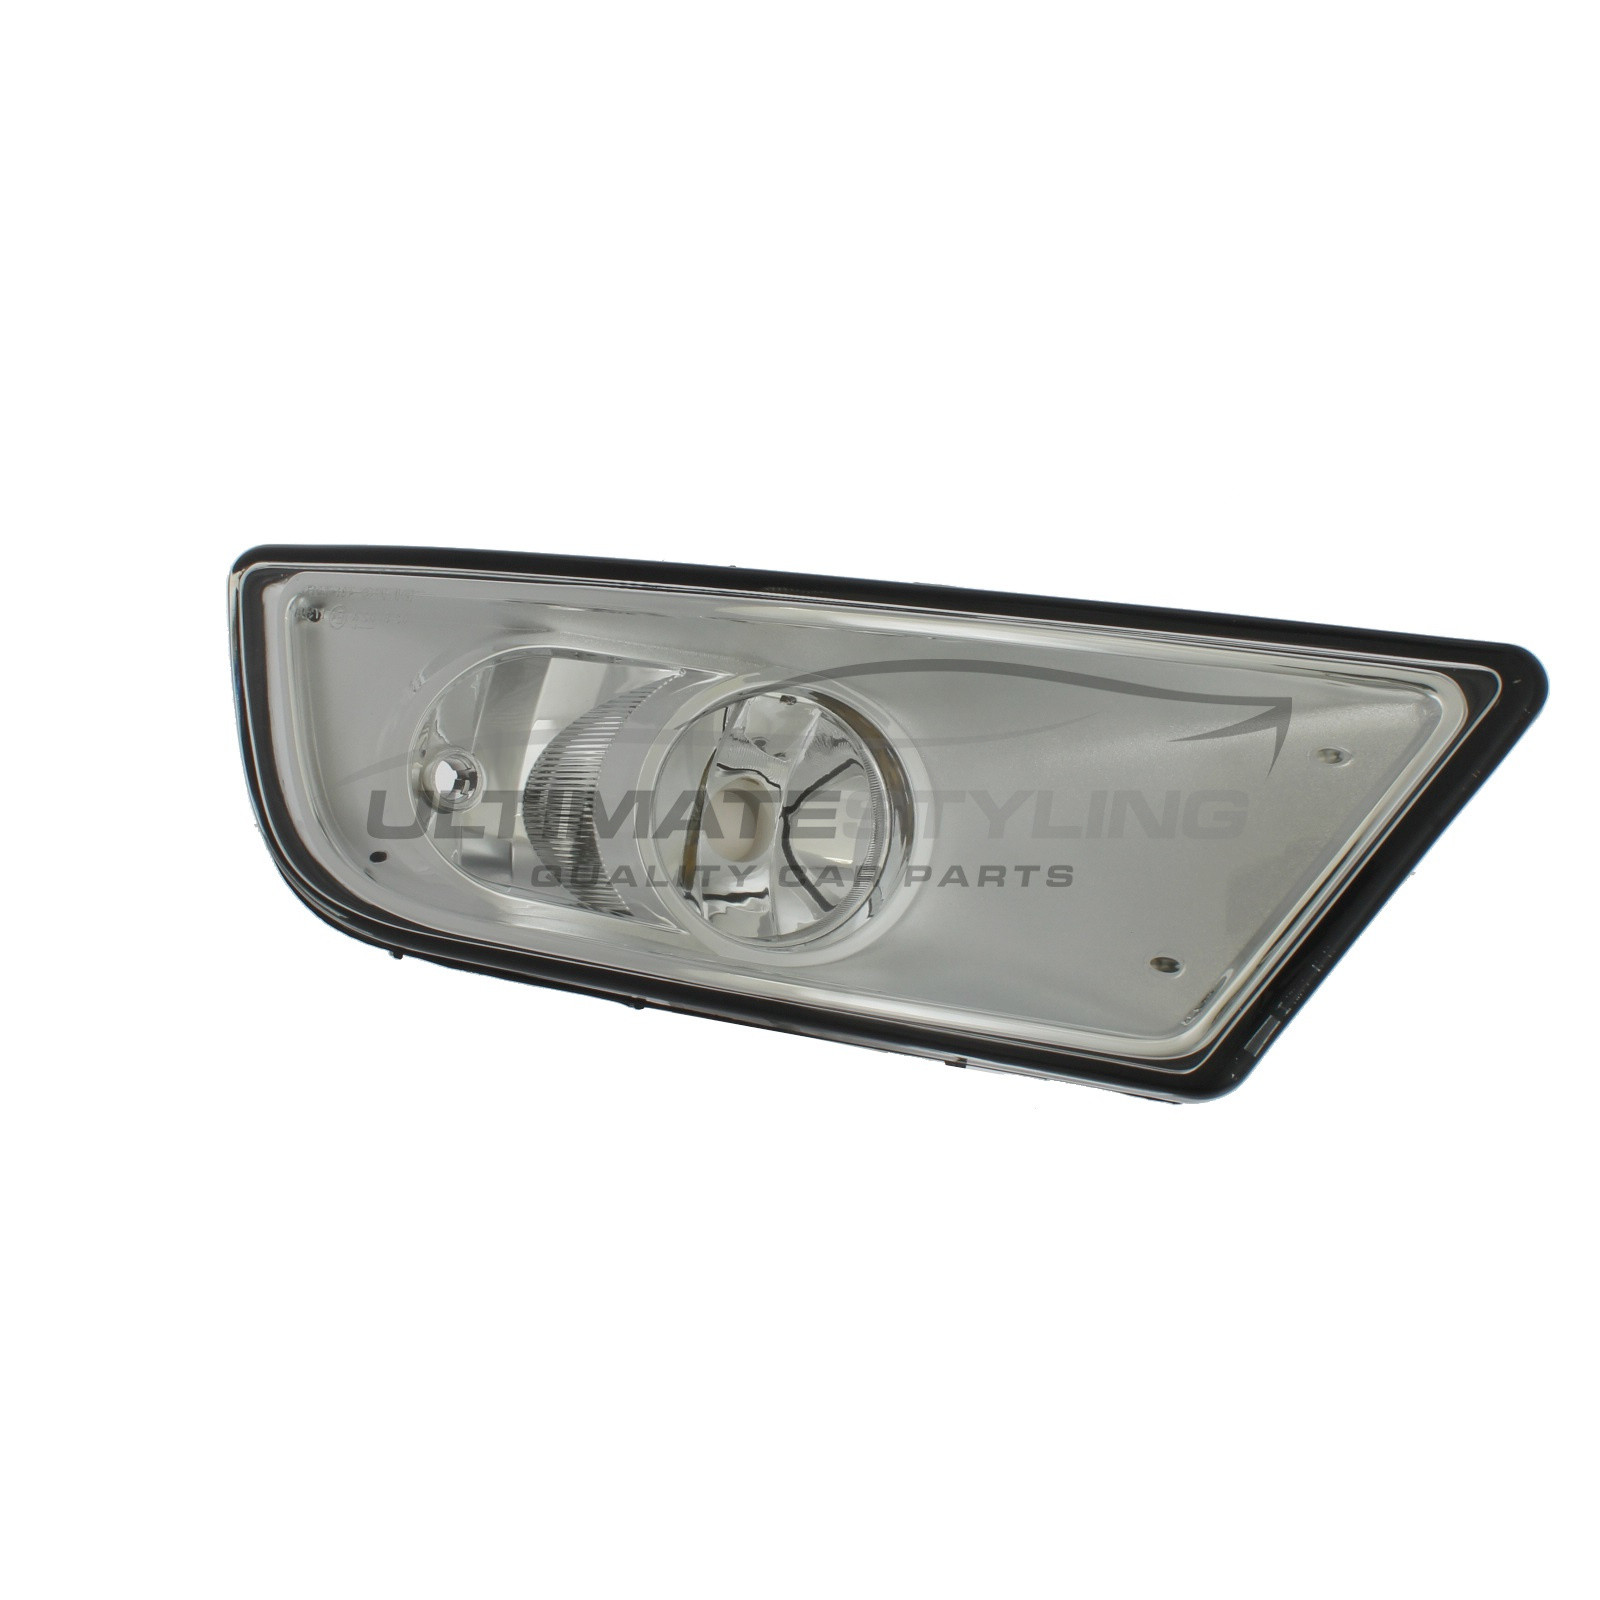 Ford Galaxy 2006-2011 Front Fog Lamp & Side Lamp Chrome Inner (Non-LED) Drivers Side (RH)